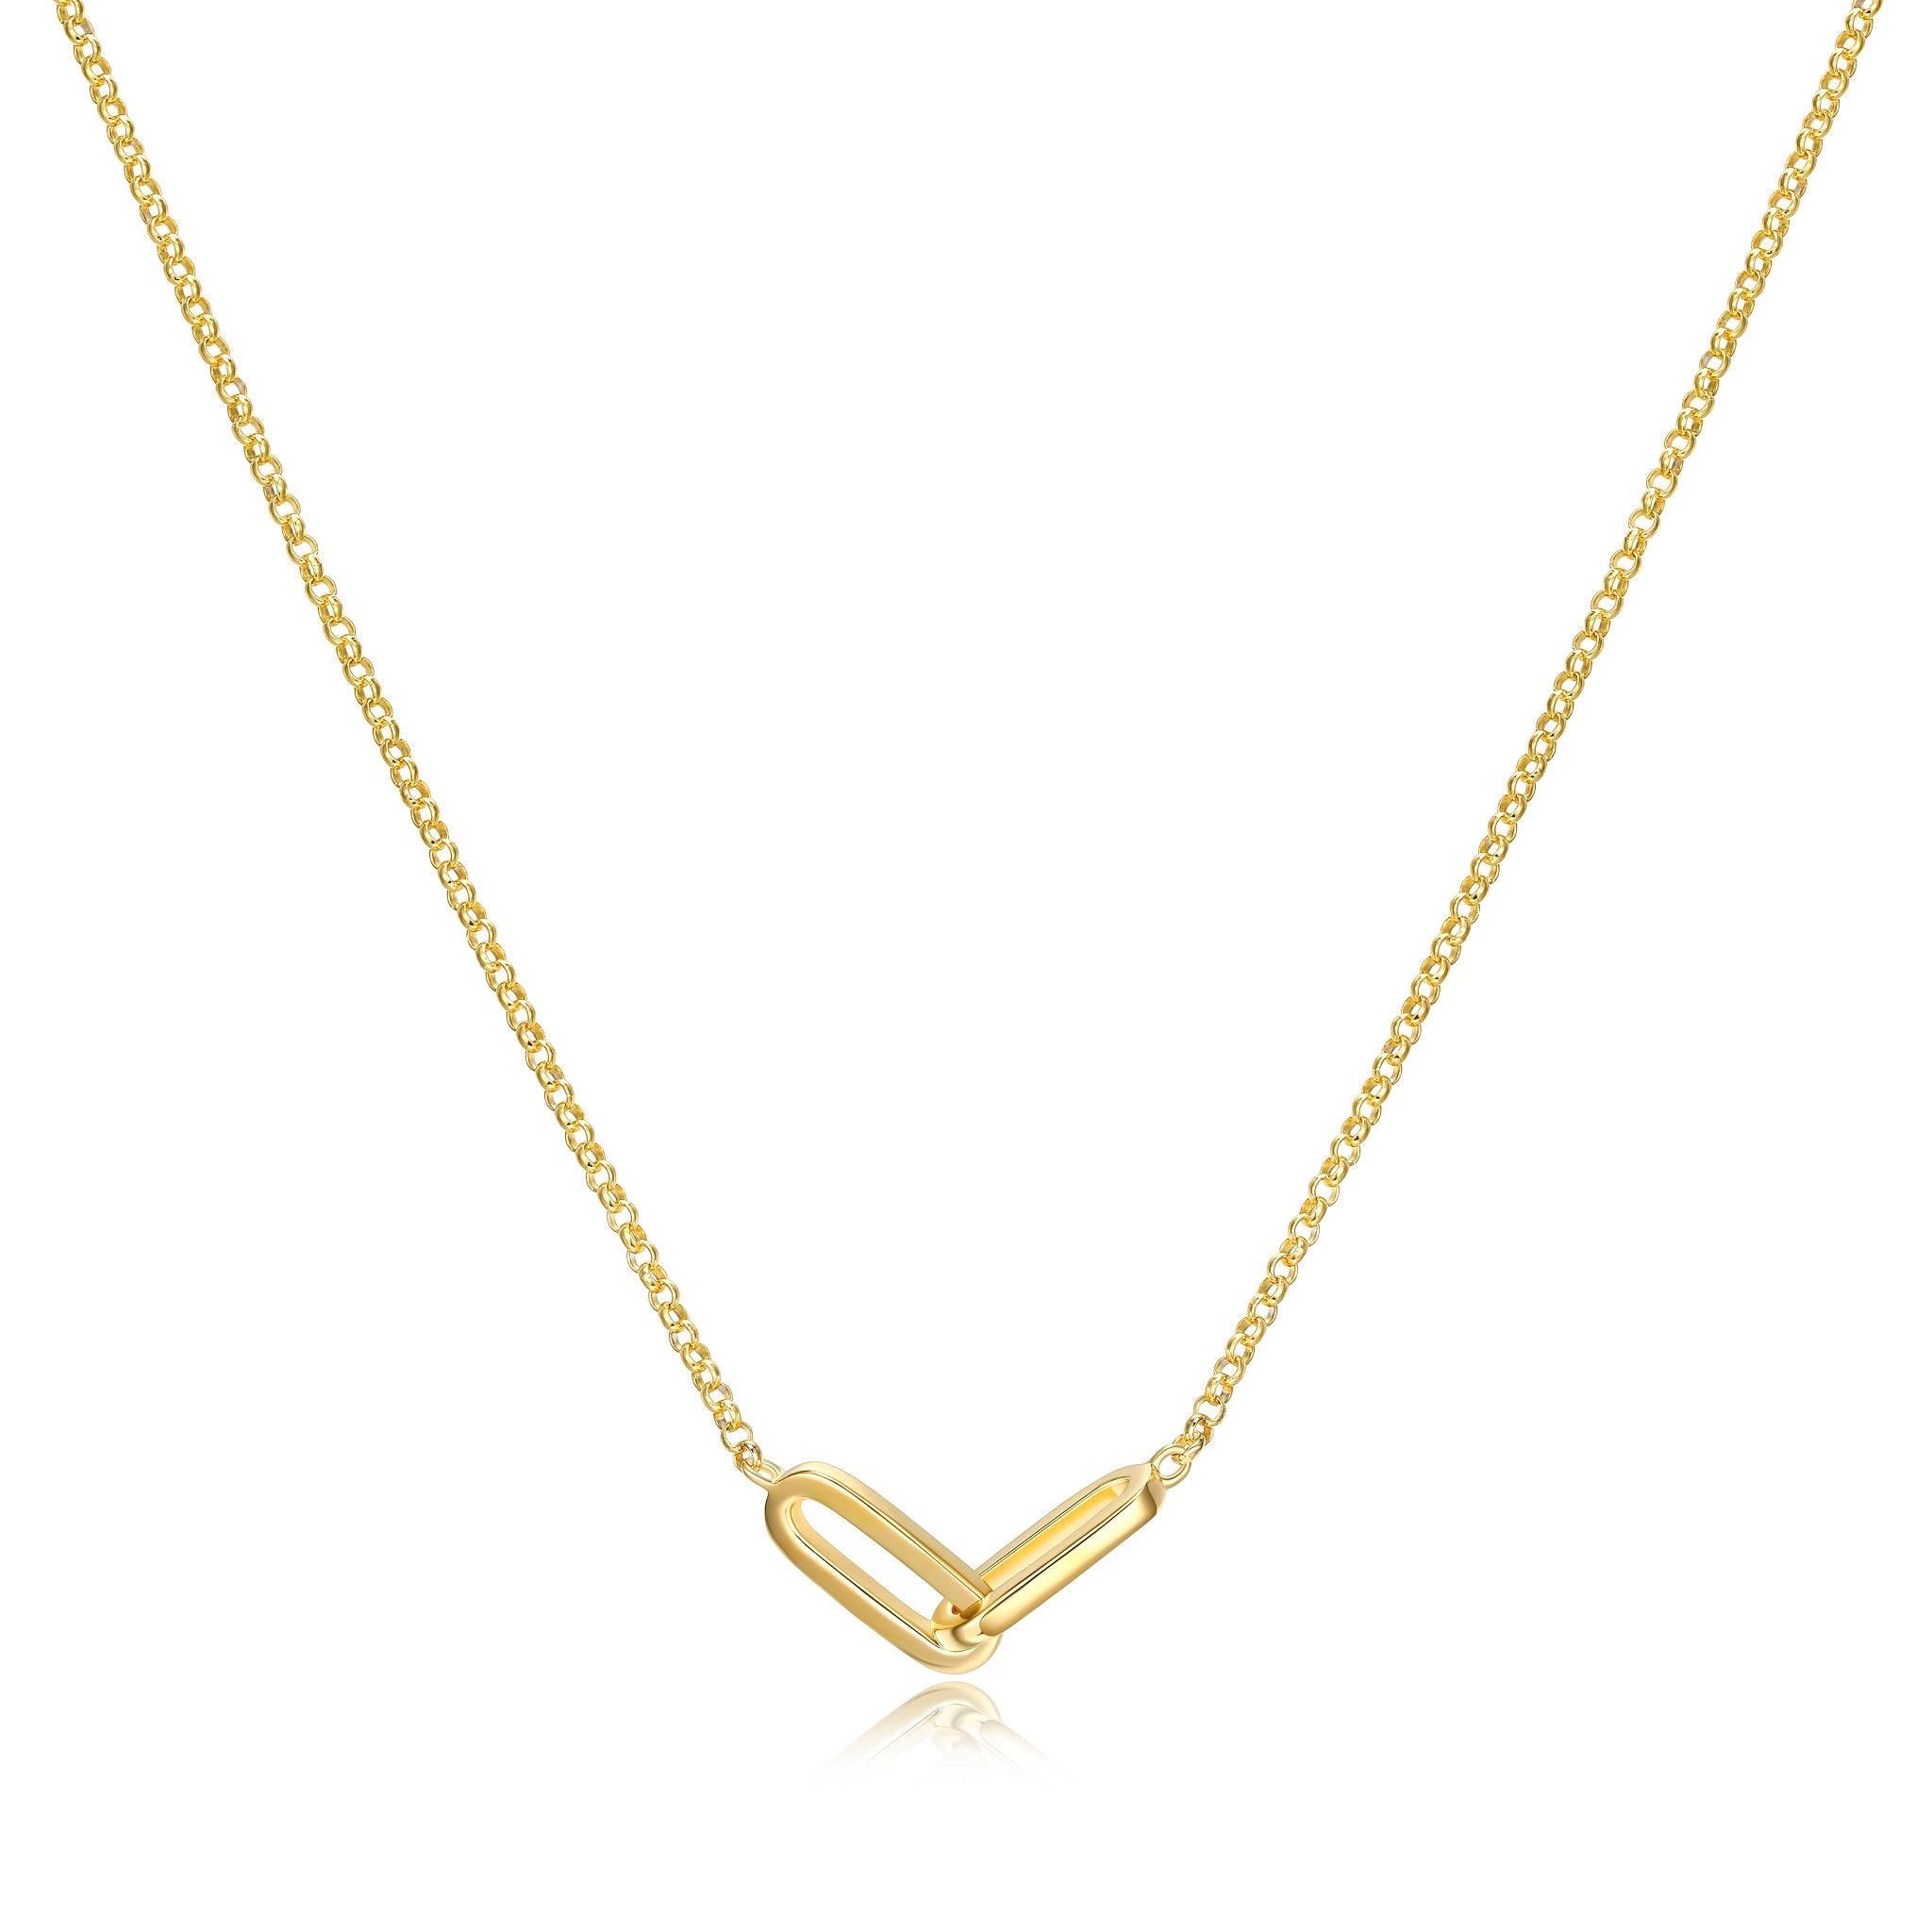 Reign Double Link Rolo Necklace in 18k gold plate